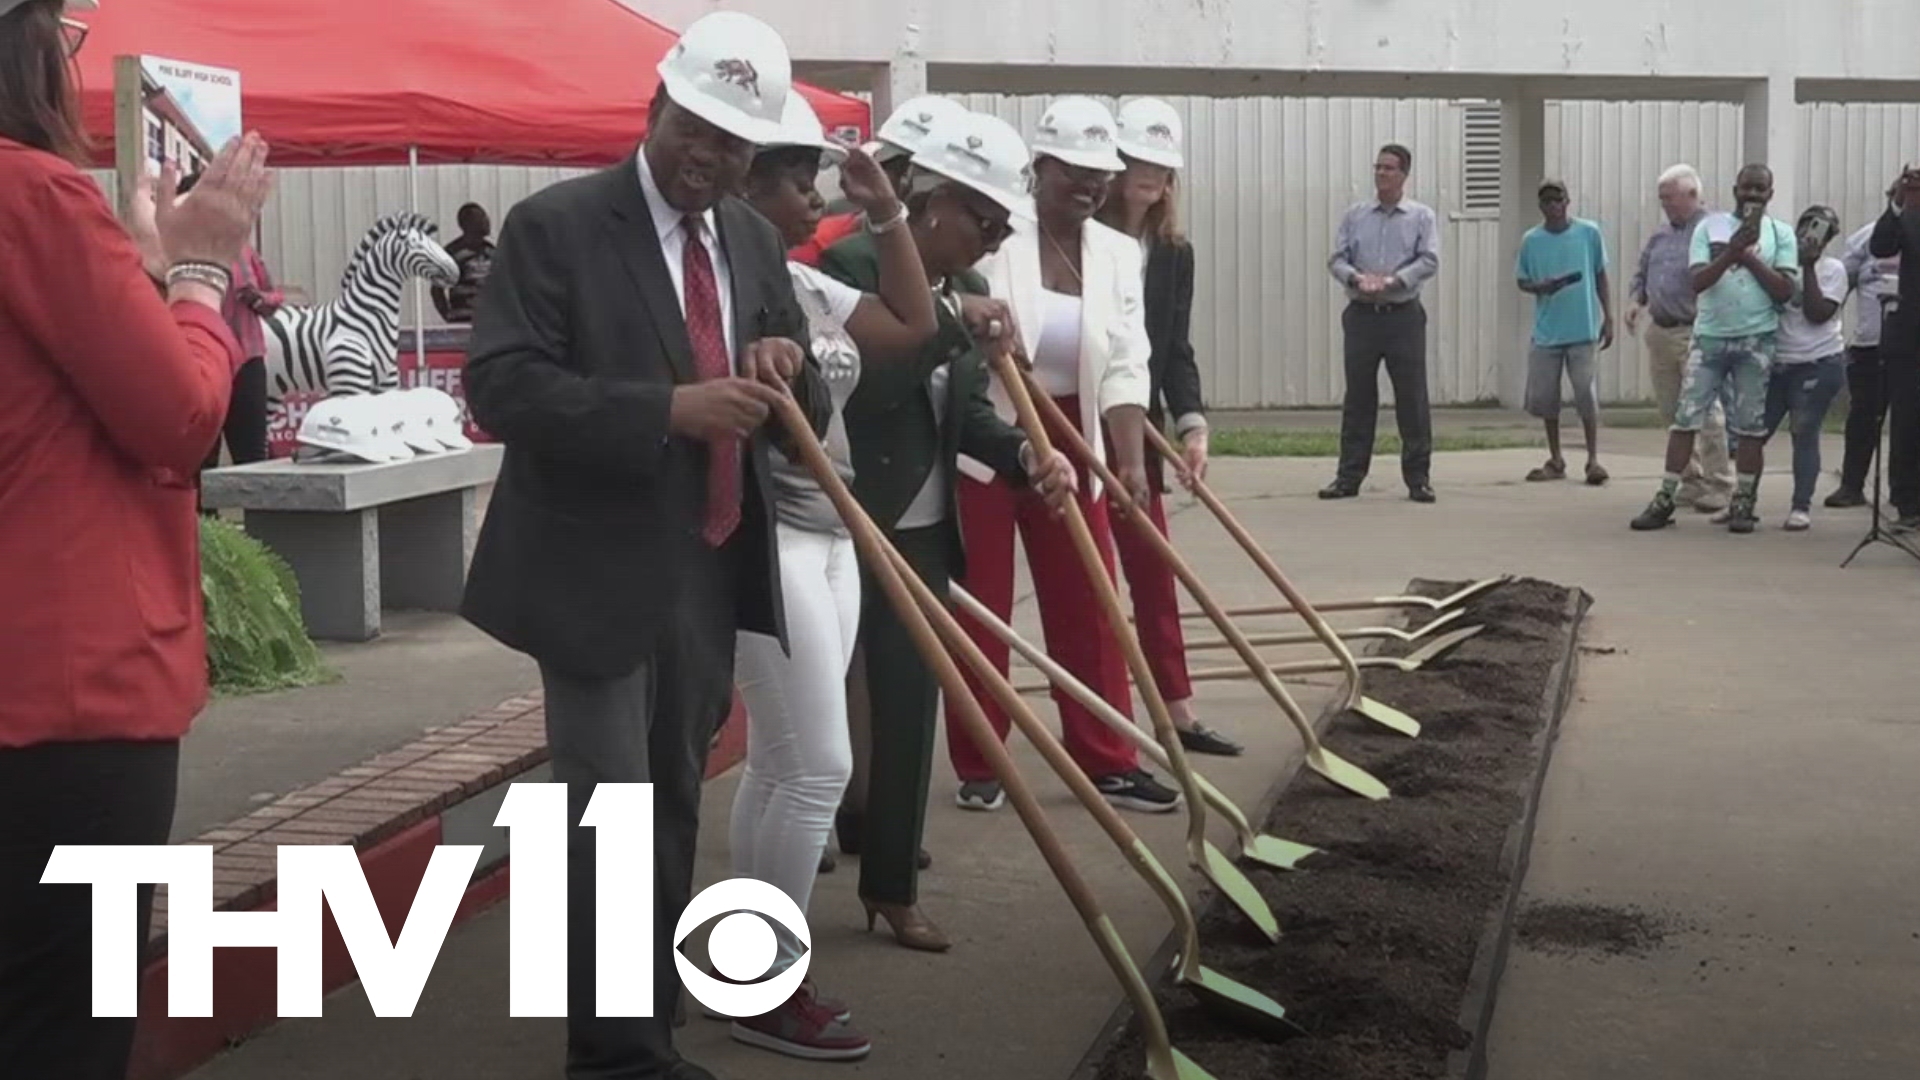 Renderings are becoming a reality in Pine Bluff as the school district broke ground on its long-awaited high school.